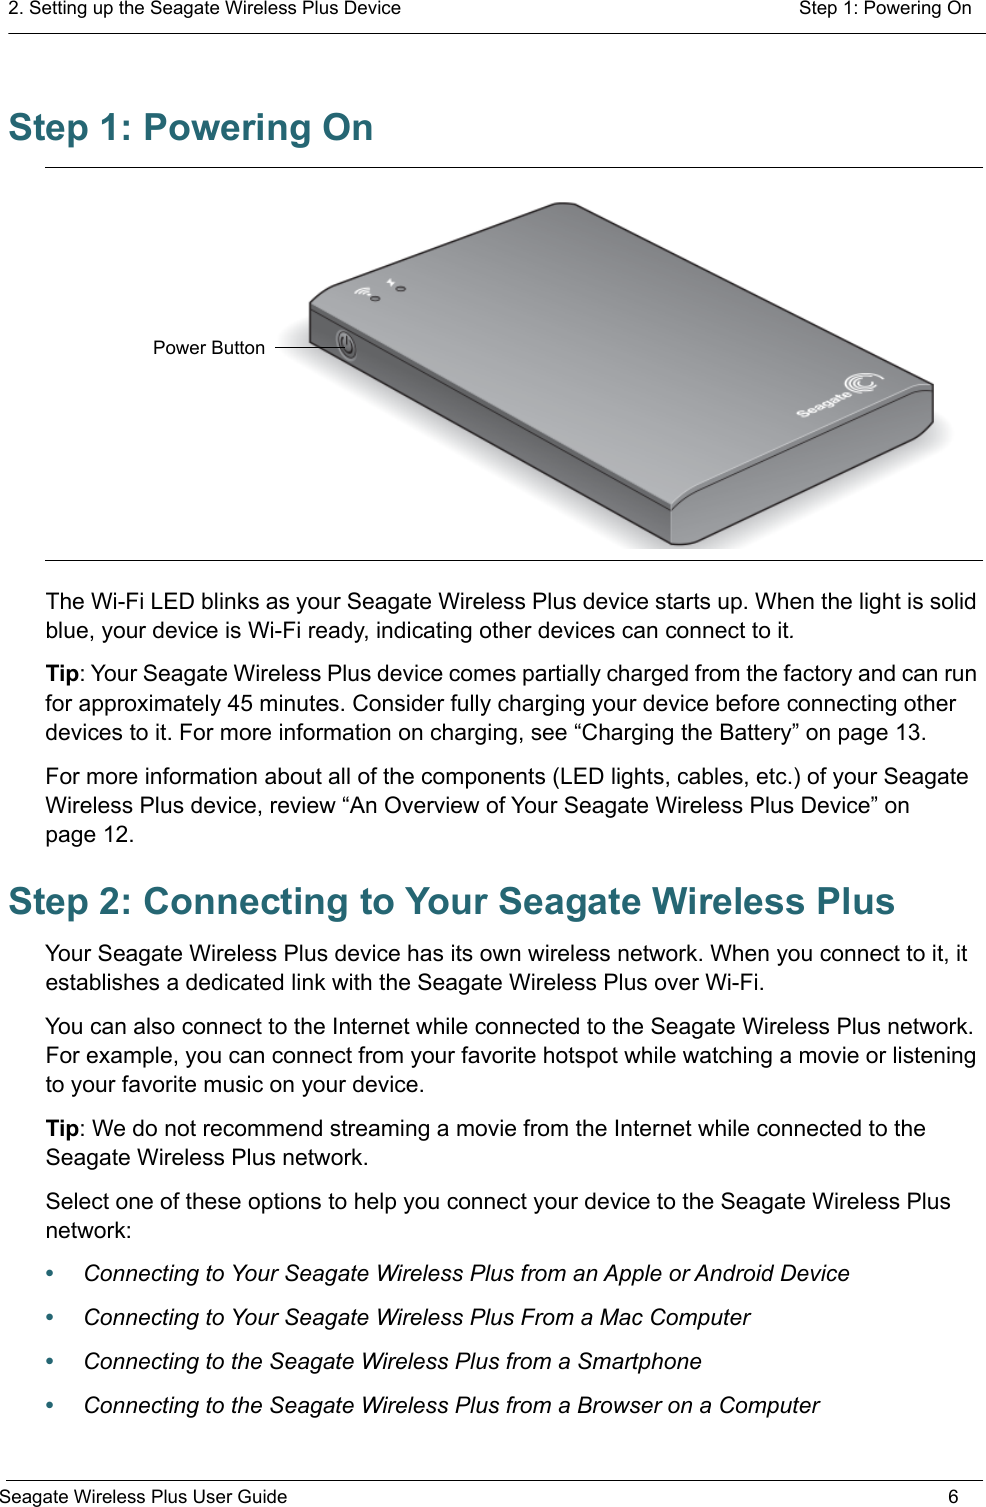 2. Setting up the Seagate Wireless Plus Device  Step 1: Powering OnSeagate Wireless Plus User Guide 6Step 1: Powering OnThe Wi-Fi LED blinks as your Seagate Wireless Plus device starts up. When the light is solid blue, your device is Wi-Fi ready, indicating other devices can connect to it.Tip: Your Seagate Wireless Plus device comes partially charged from the factory and can run for approximately 45 minutes. Consider fully charging your device before connecting other devices to it. For more information on charging, see “Charging the Battery” on page 13.For more information about all of the components (LED lights, cables, etc.) of your Seagate Wireless Plus device, review “An Overview of Your Seagate Wireless Plus Device” on page 12.Step 2: Connecting to Your Seagate Wireless PlusYour Seagate Wireless Plus device has its own wireless network. When you connect to it, it establishes a dedicated link with the Seagate Wireless Plus over Wi-Fi. You can also connect to the Internet while connected to the Seagate Wireless Plus network. For example, you can connect from your favorite hotspot while watching a movie or listening to your favorite music on your device.Tip: We do not recommend streaming a movie from the Internet while connected to the Seagate Wireless Plus network.Select one of these options to help you connect your device to the Seagate Wireless Plus network:•Connecting to Your Seagate Wireless Plus from an Apple or Android Device•Connecting to Your Seagate Wireless Plus From a Mac Computer•Connecting to the Seagate Wireless Plus from a Smartphone•Connecting to the Seagate Wireless Plus from a Browser on a ComputerPower Button